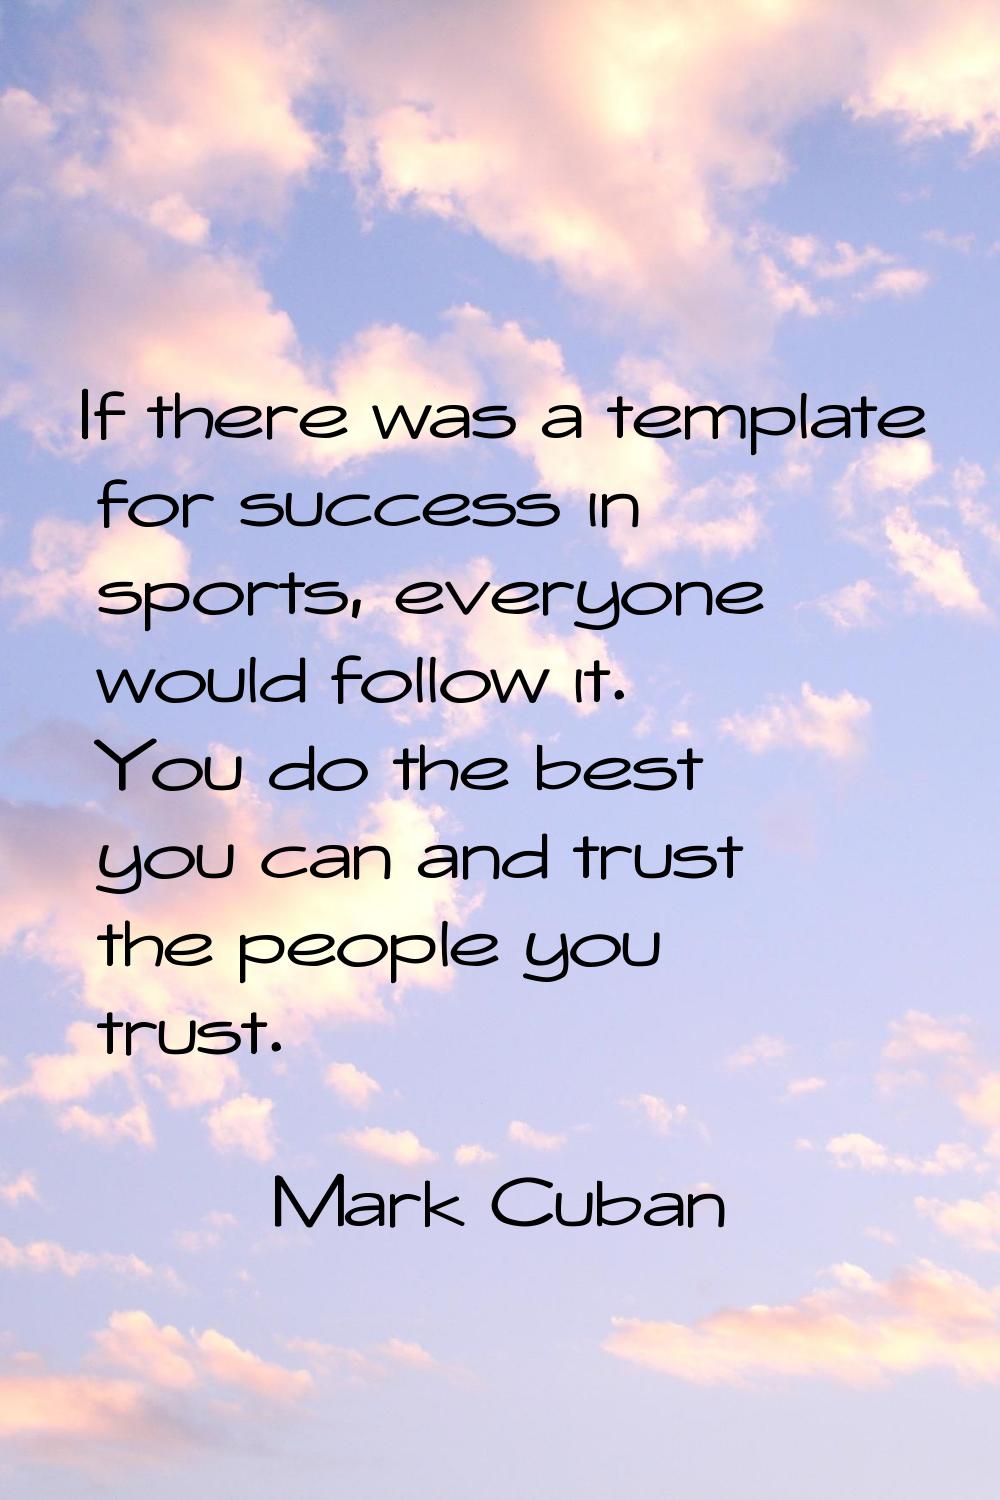 If there was a template for success in sports, everyone would follow it. You do the best you can an